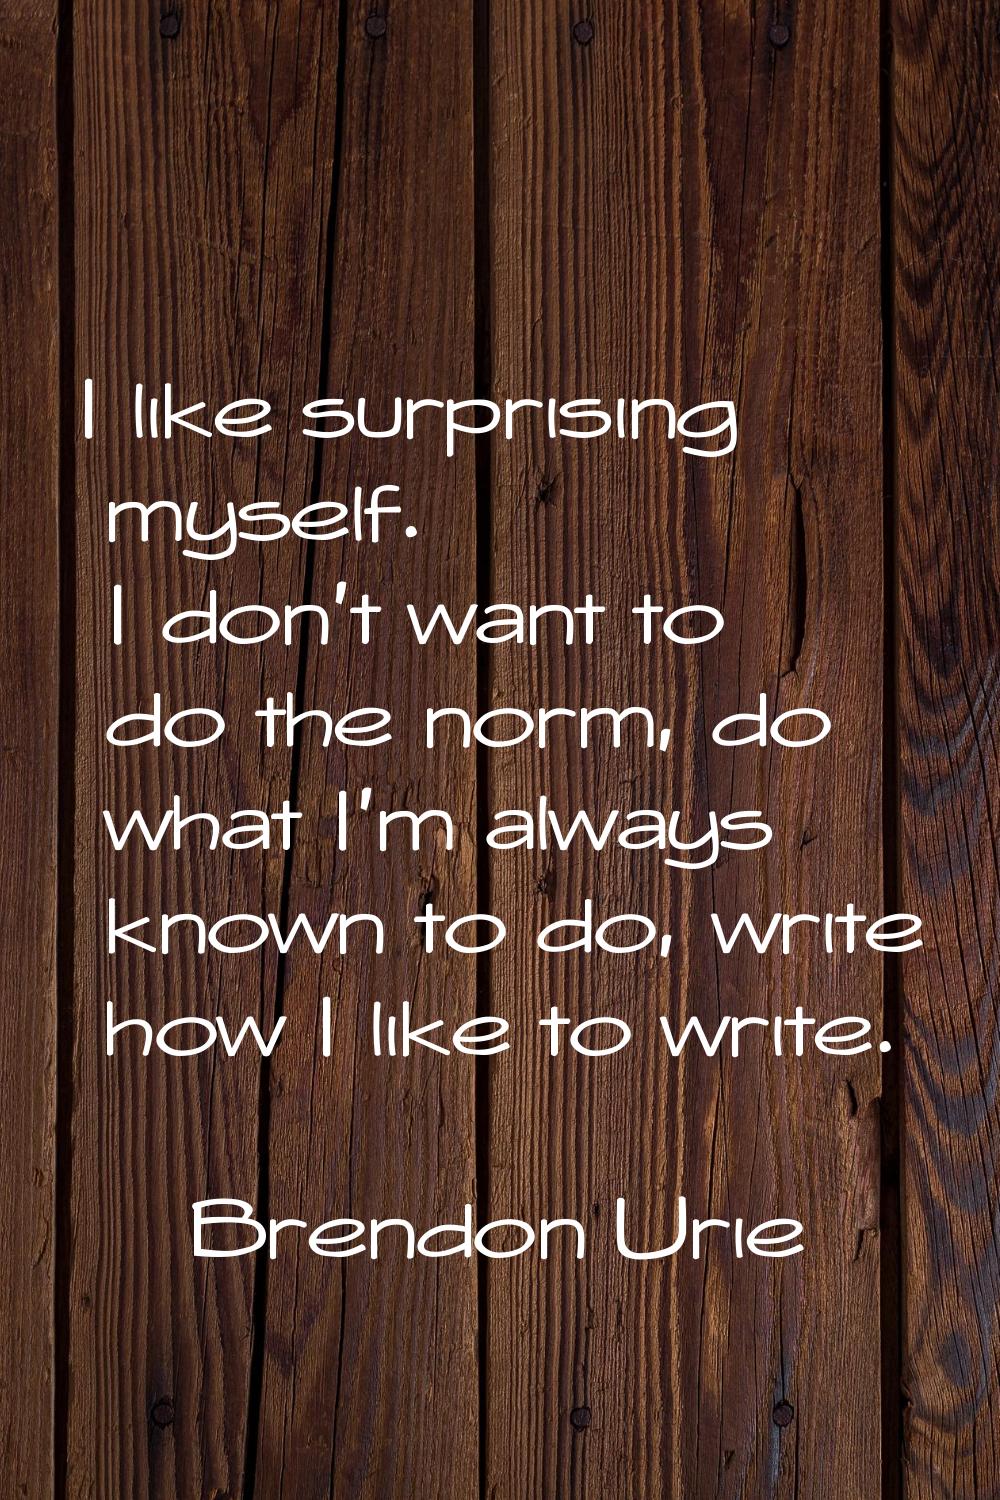 I like surprising myself. I don't want to do the norm, do what I'm always known to do, write how I 